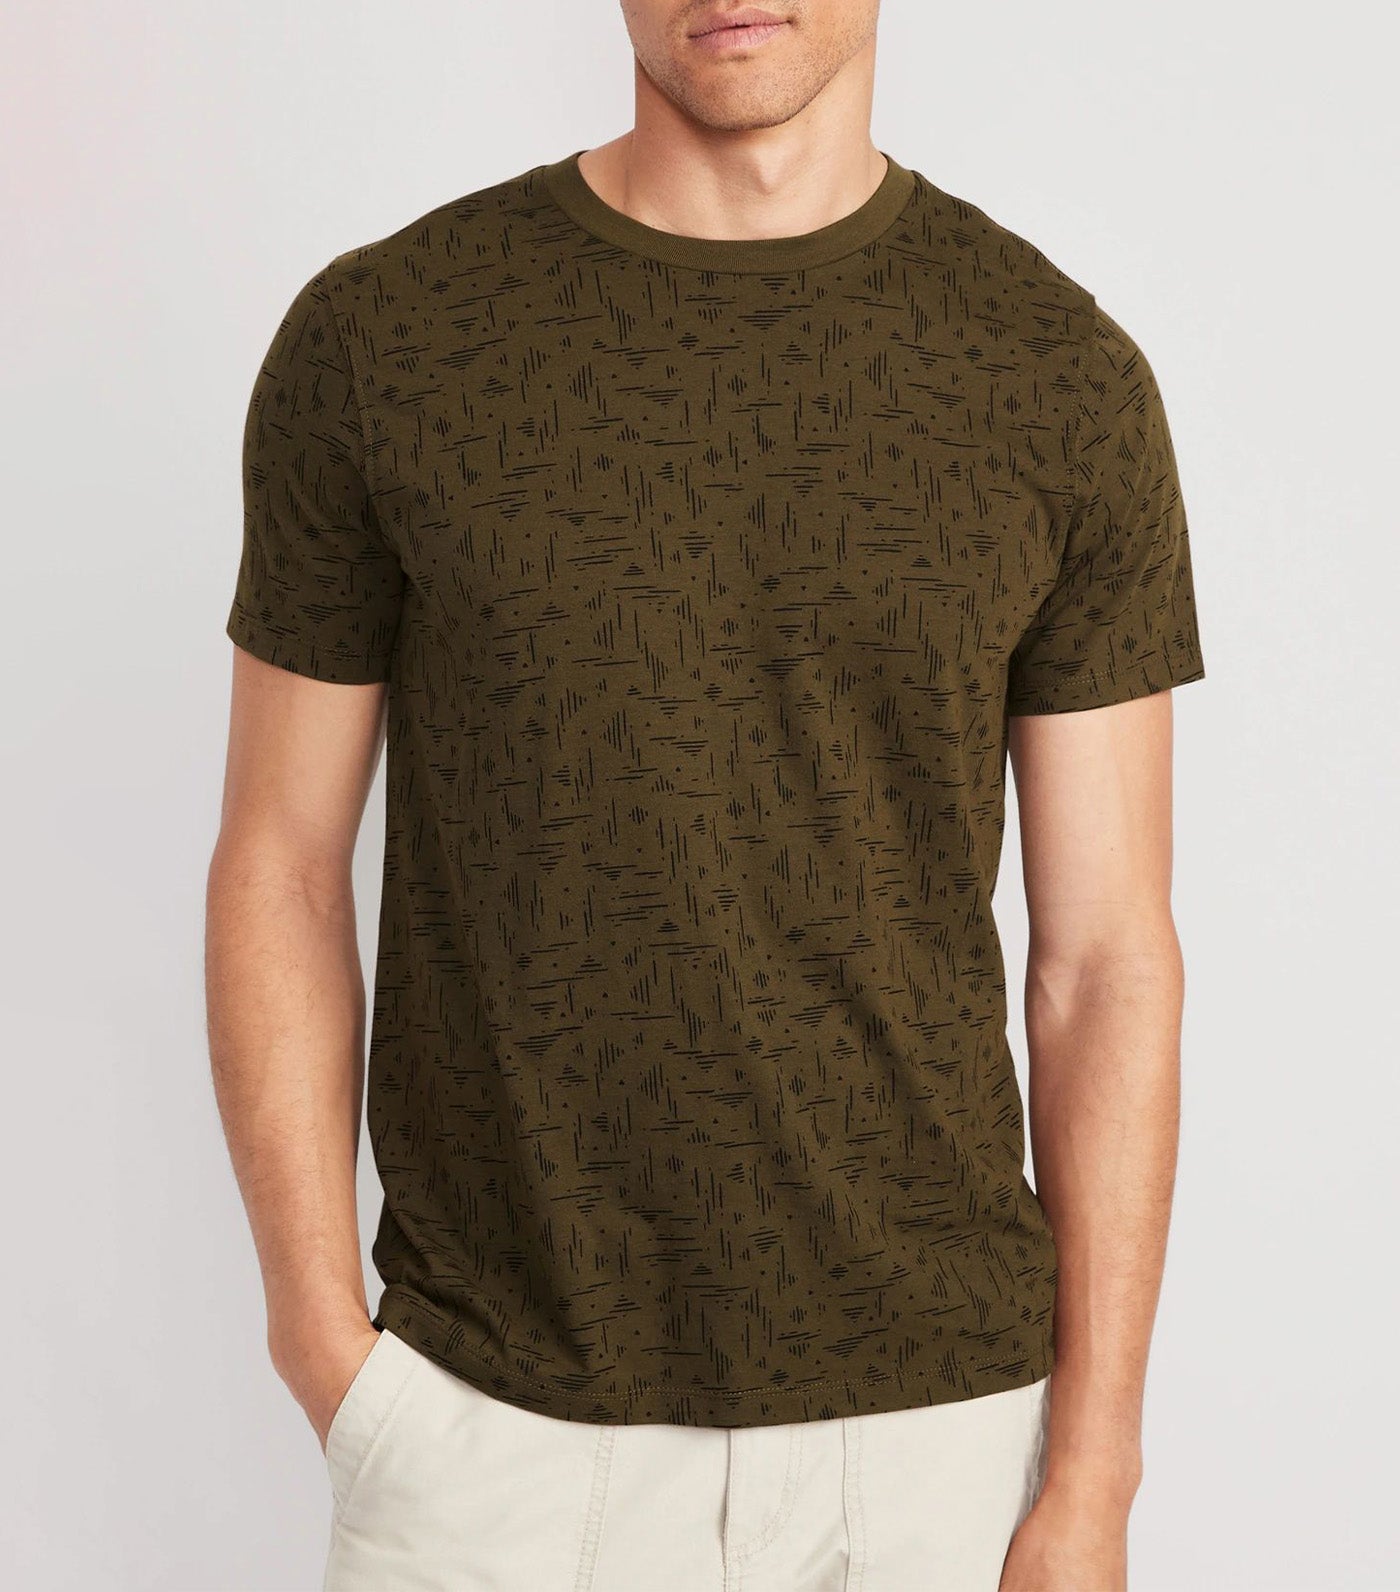 Soft-Washed Printed Crew-Neck T-Shirt for Men Geo